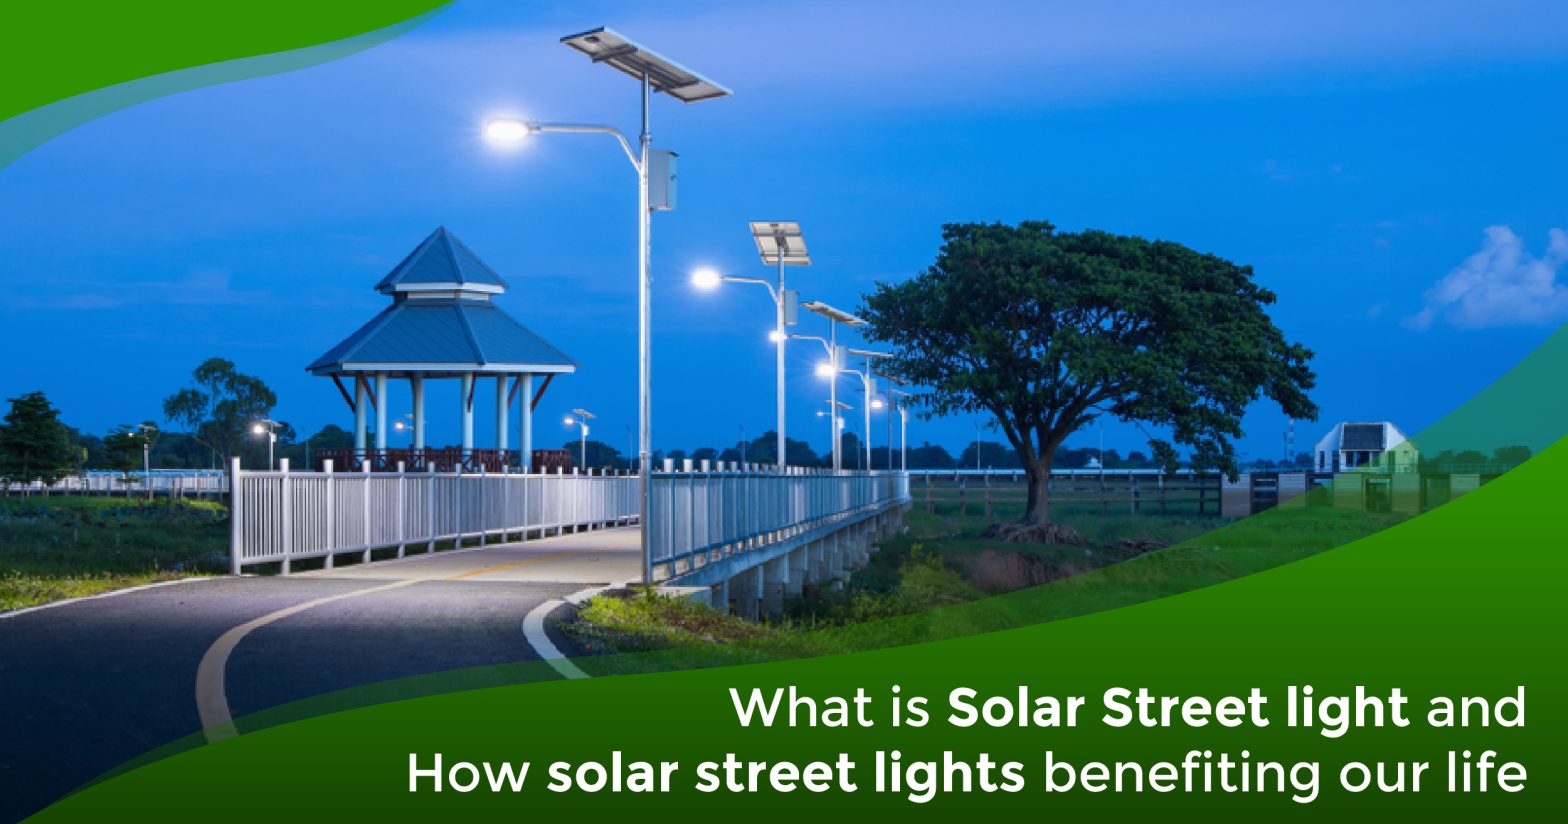 Solar street light and benefiting our life